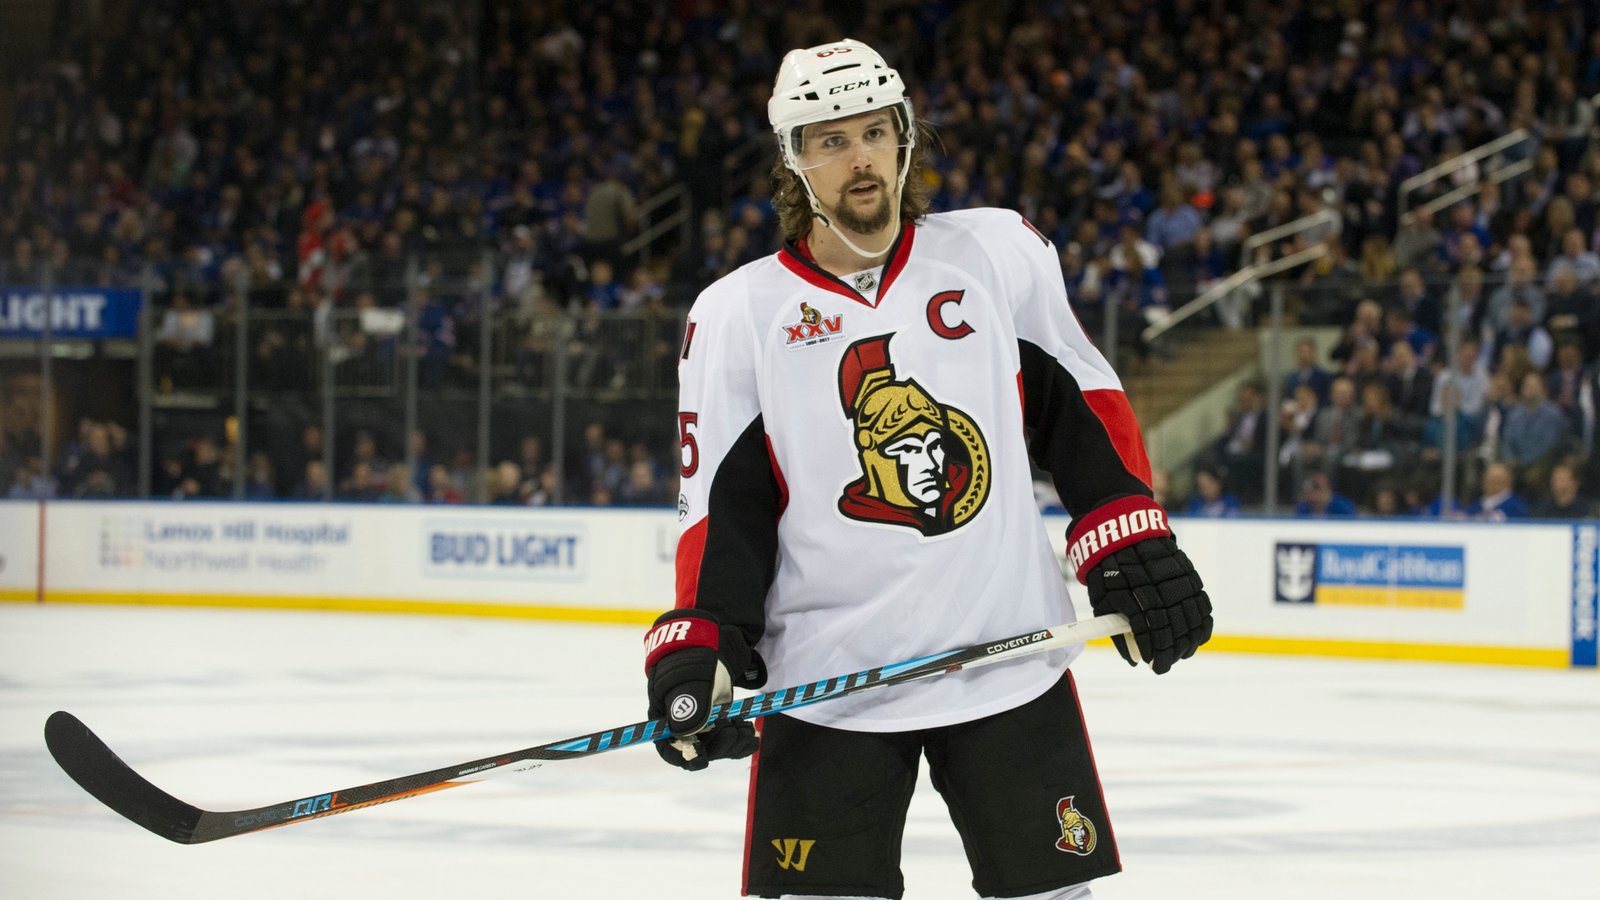 Breaking: Major development in Karlsson trade discussions!